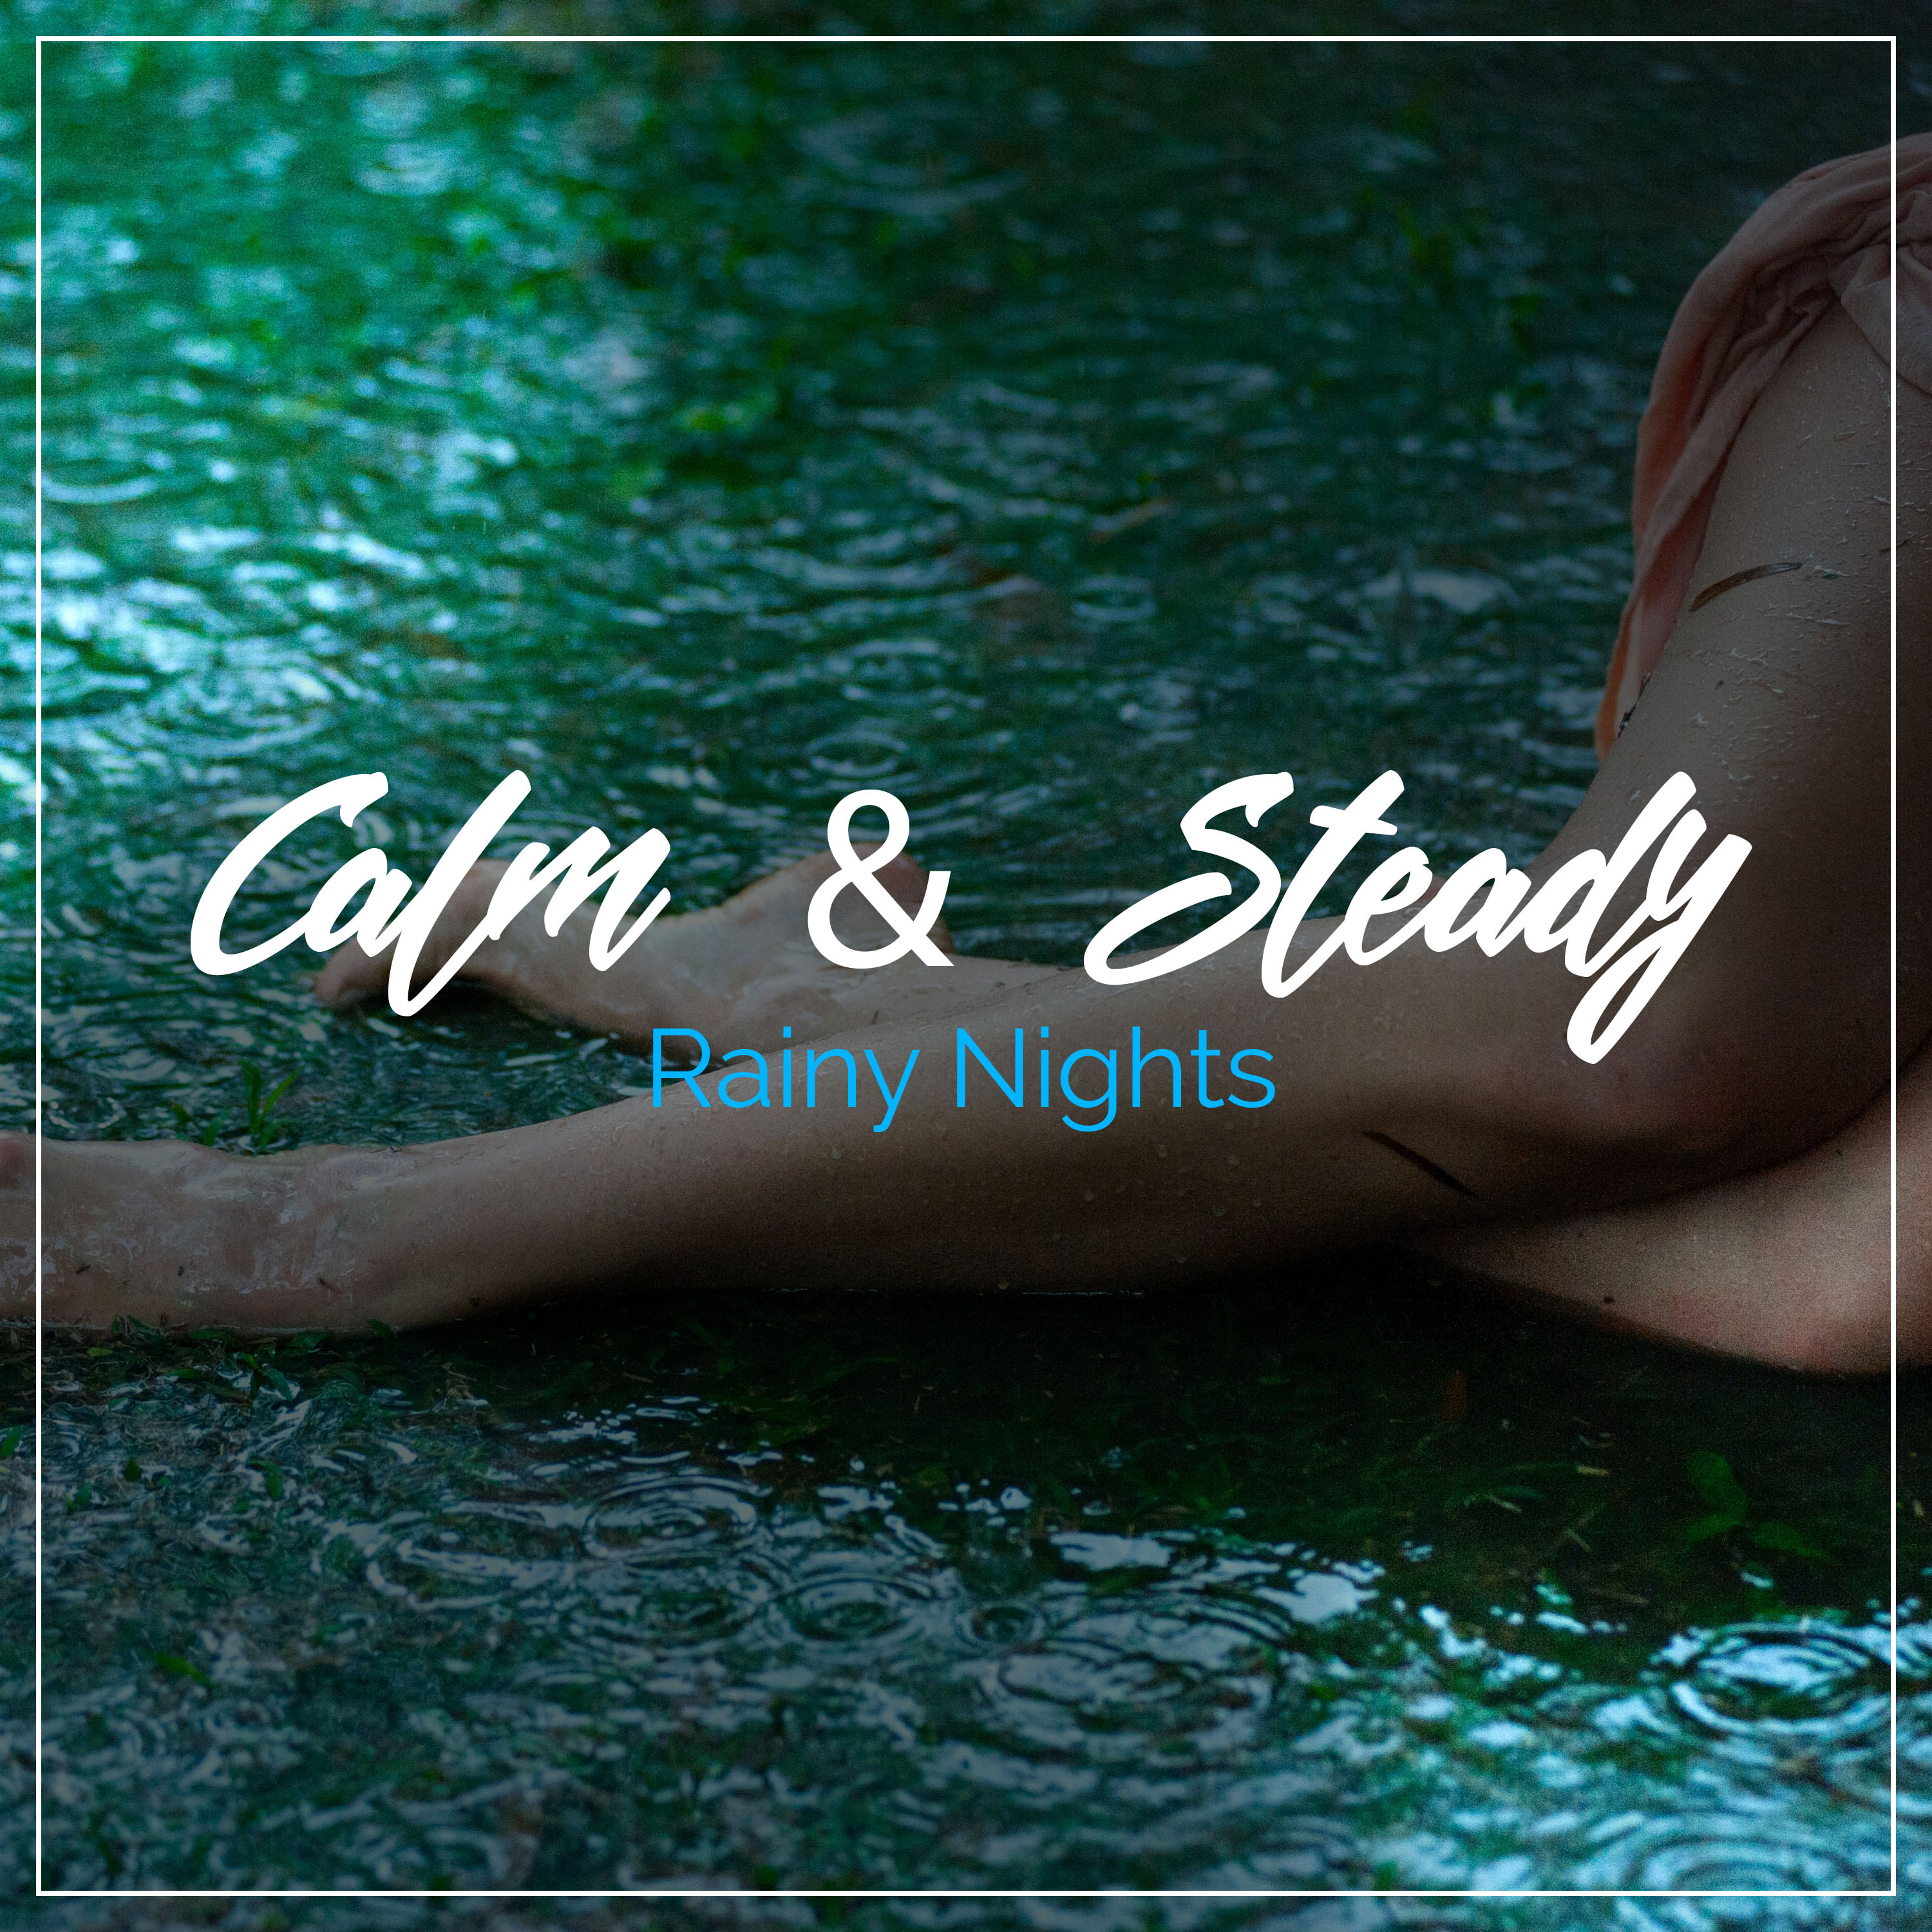 #12 Calm & Steady Rainy Nights from Nature